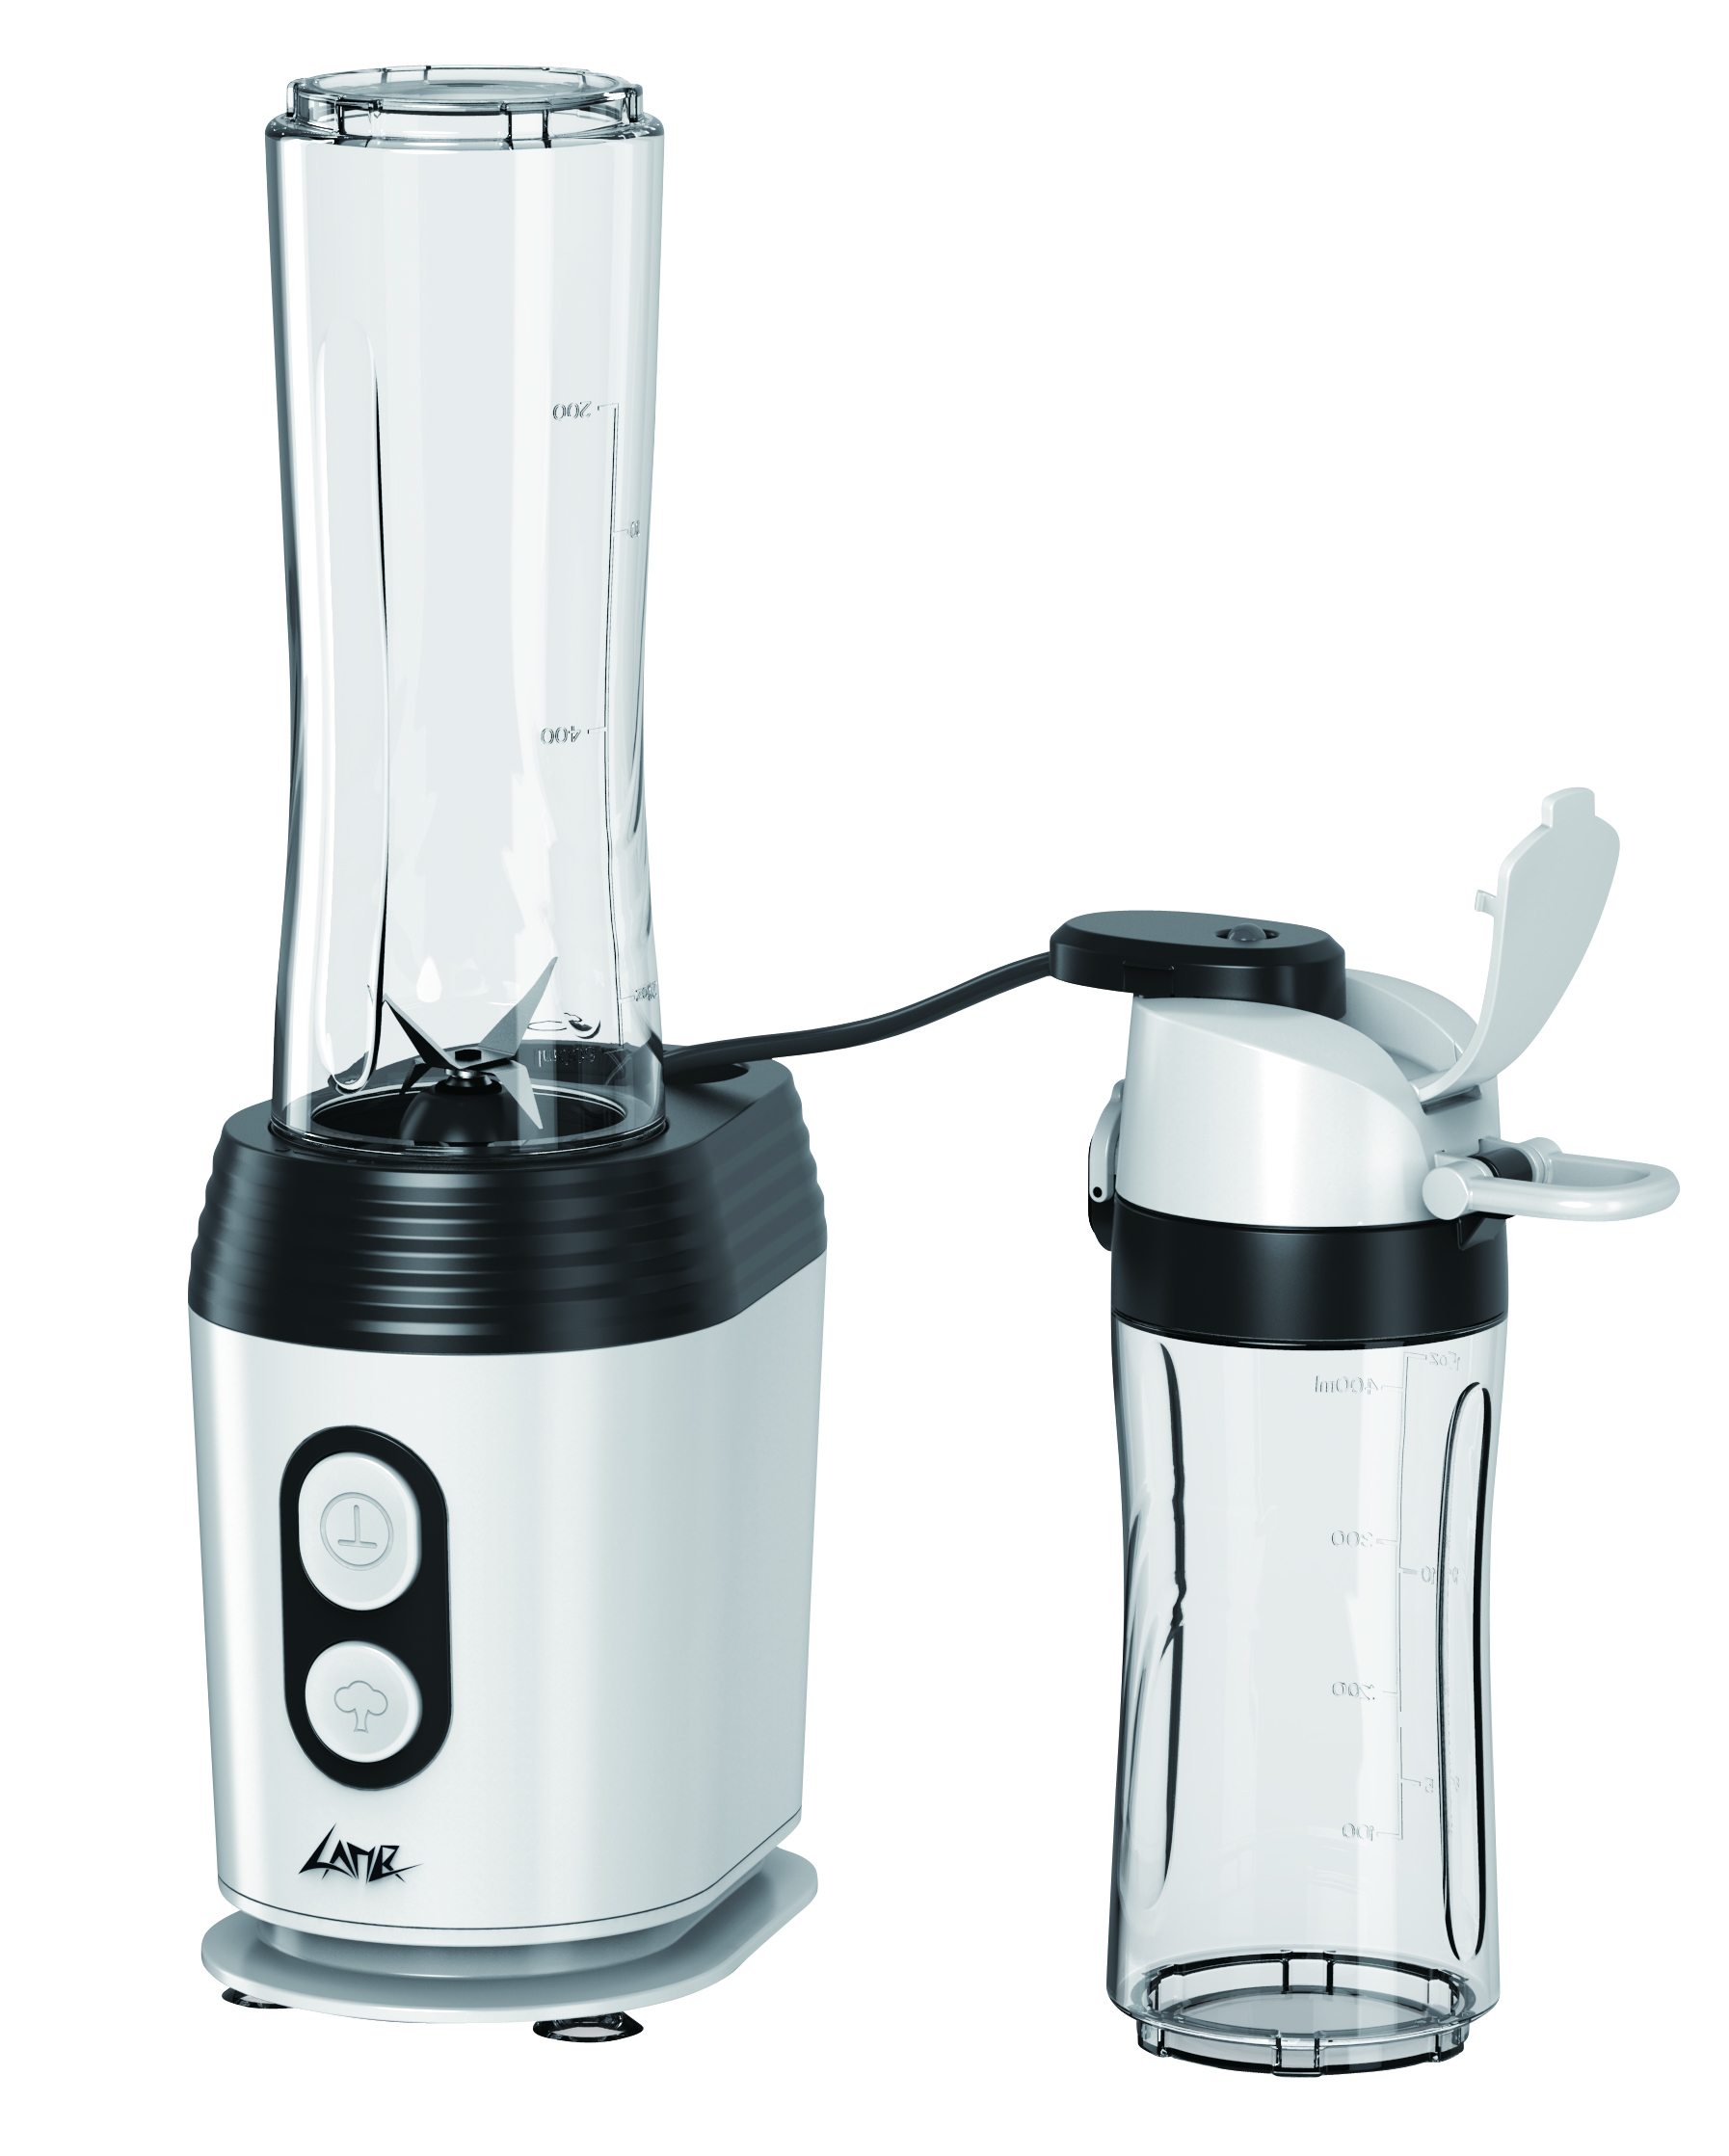 AM-1385 Table/stand blender